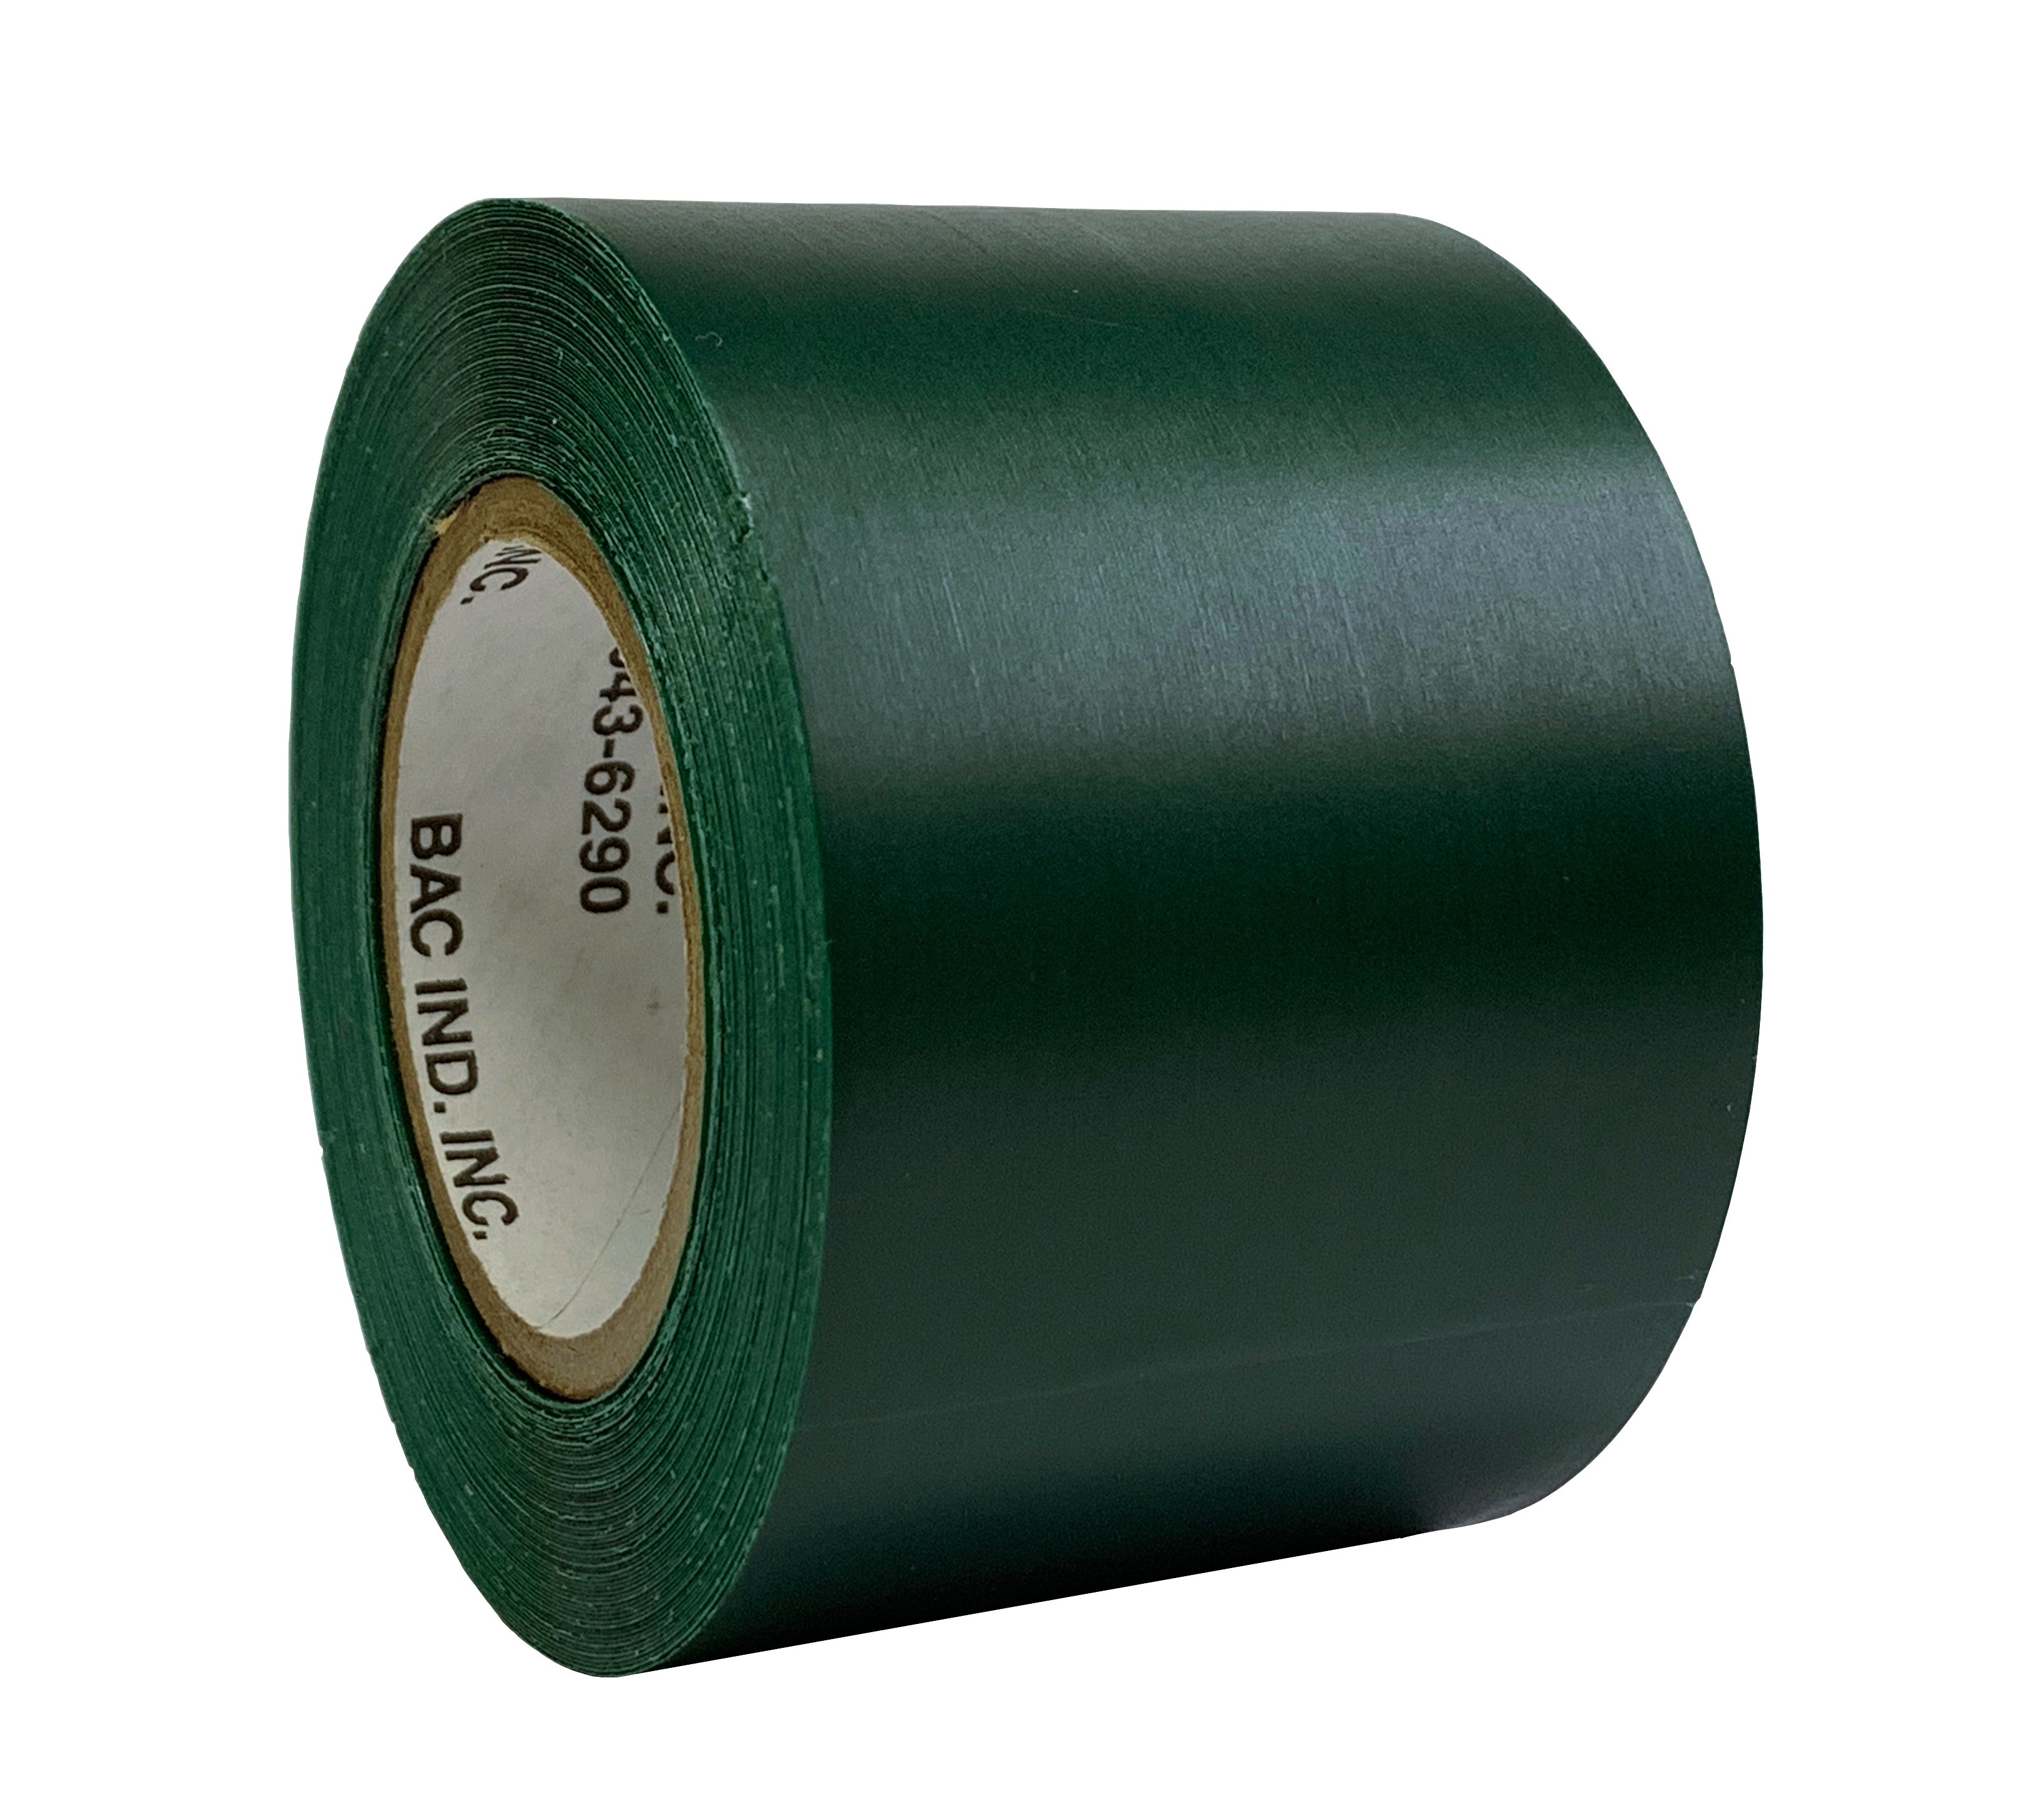 Green Tarp Tape - 2 Inch Wide x 35 Foot Roll - image 1 of 1